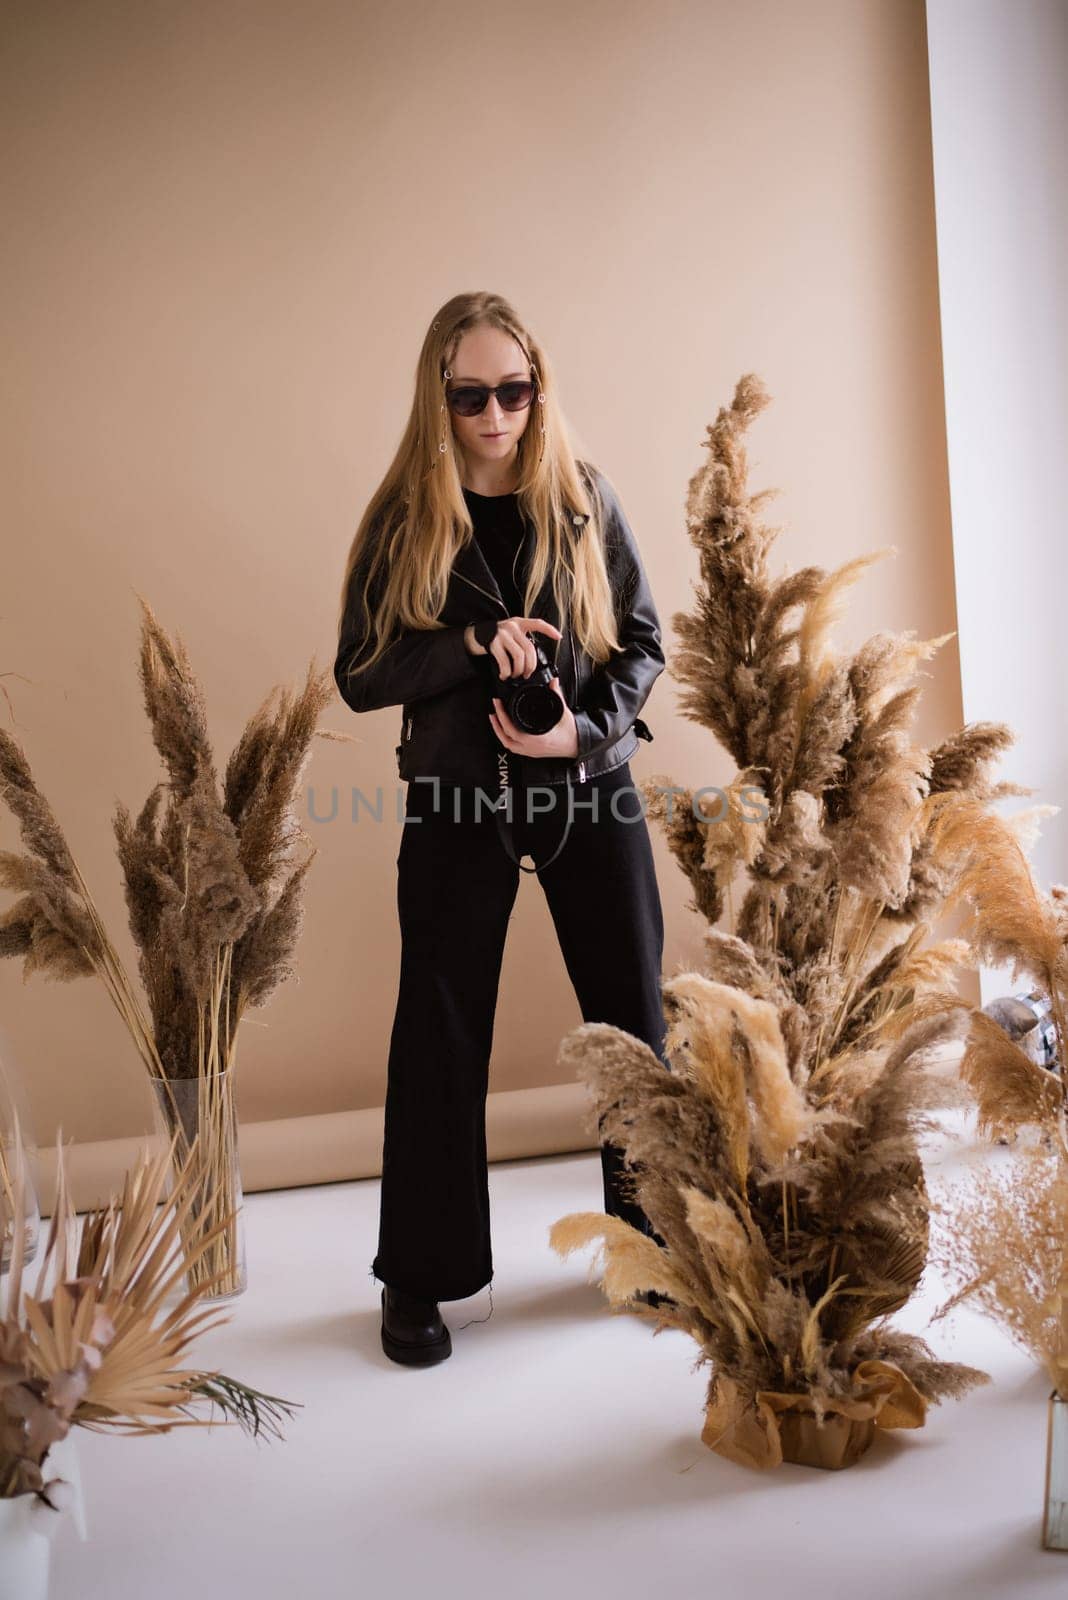 A woman director photographer, a blonde in sunglasses with a camera, seriously in the production studio. Wearing a black clothes on a brown background